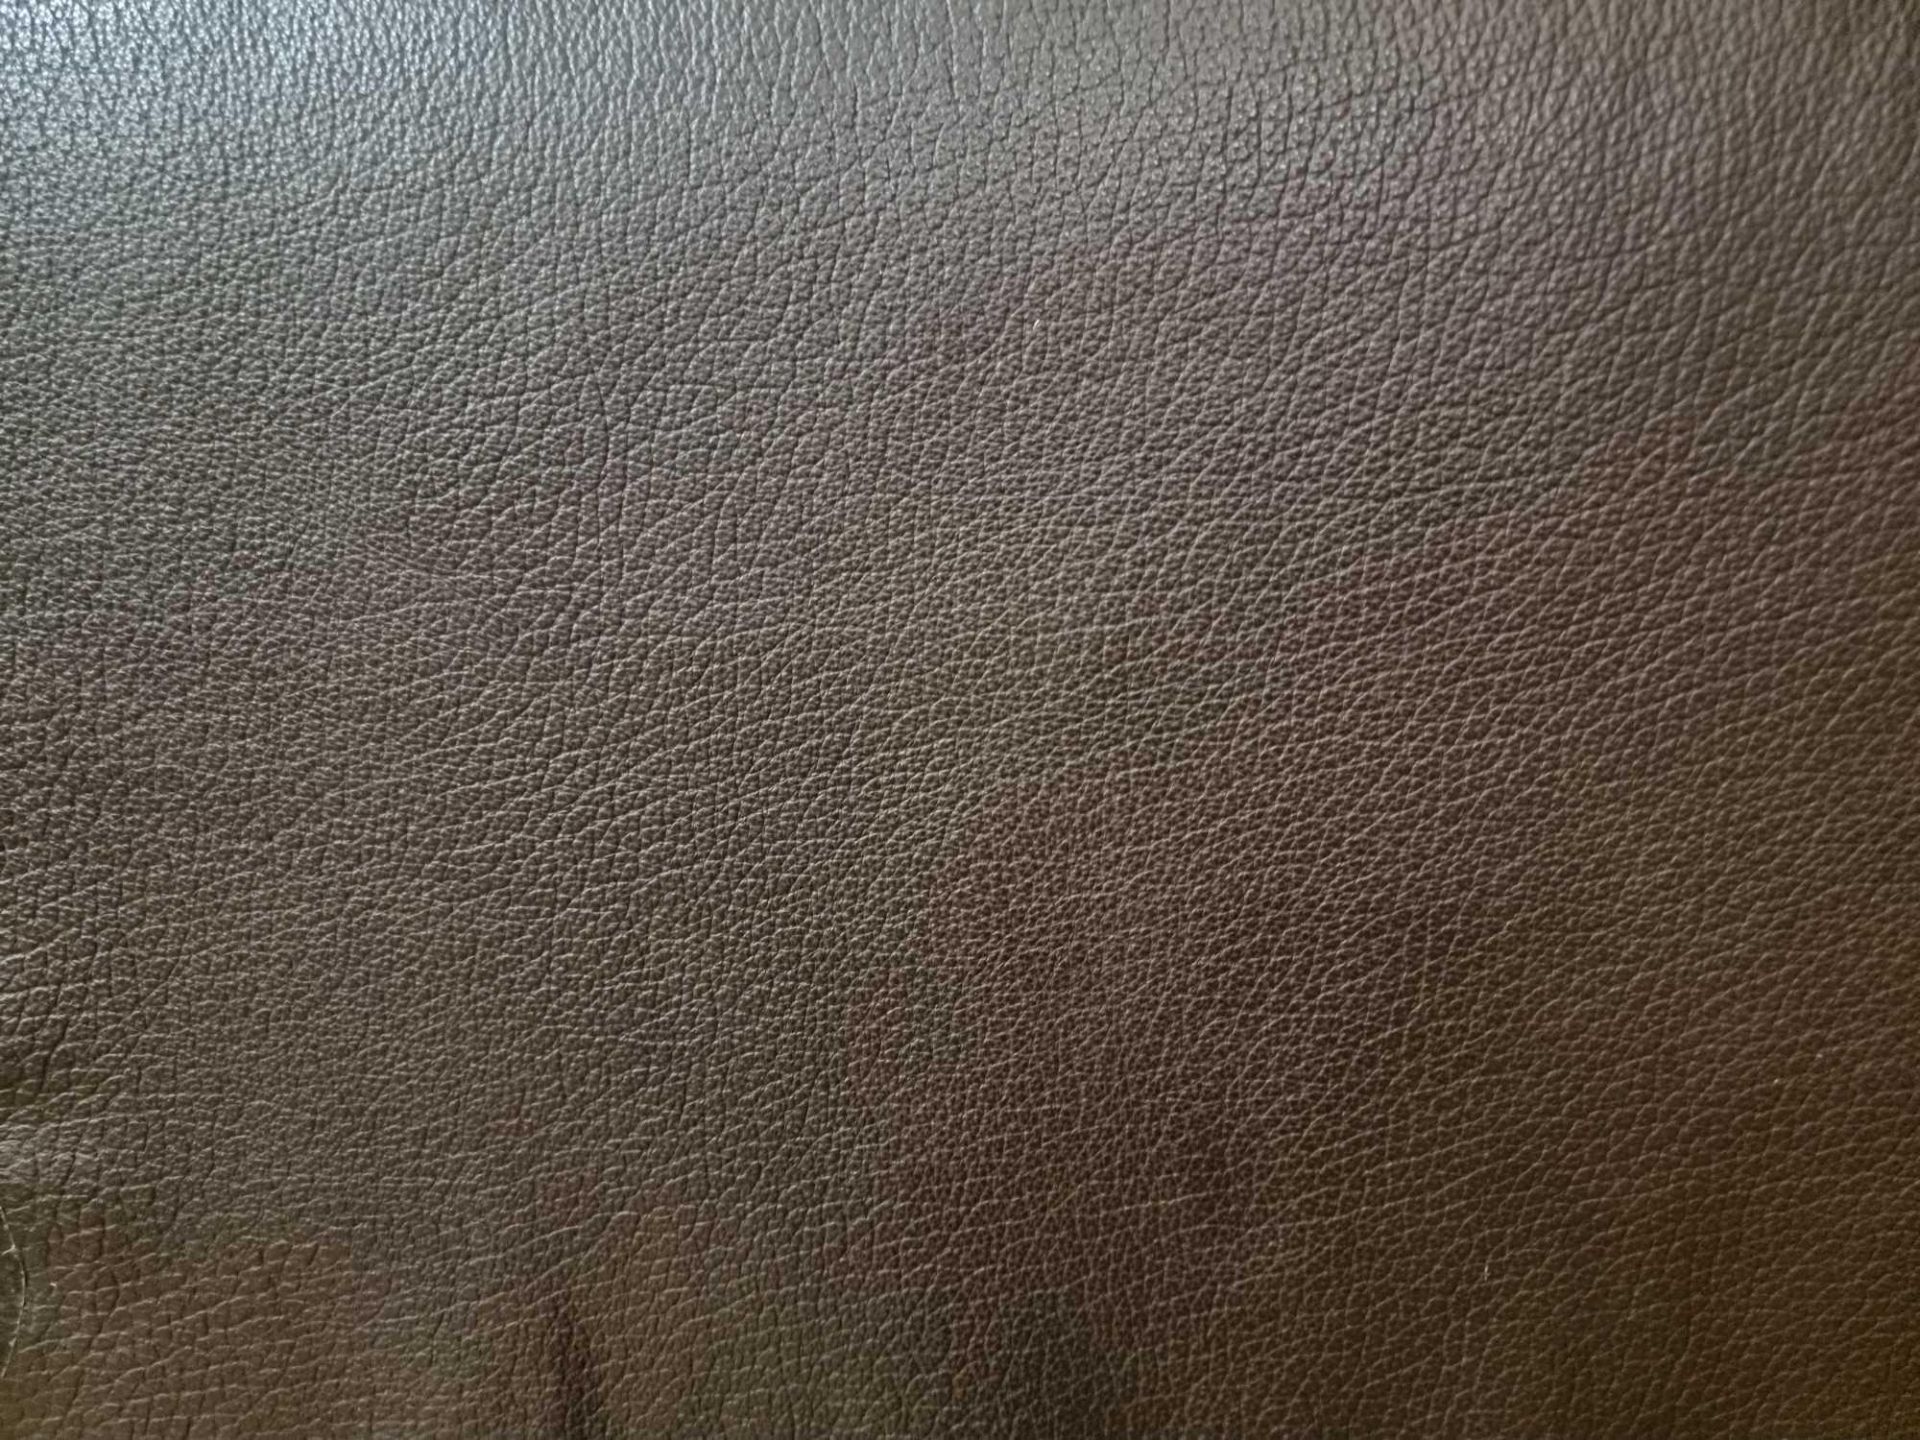 Mastrotto Hudson Chocolate Leather Hide approximately 4 2M2 2 1 x 2cm ( Hide No,25) - Image 2 of 3